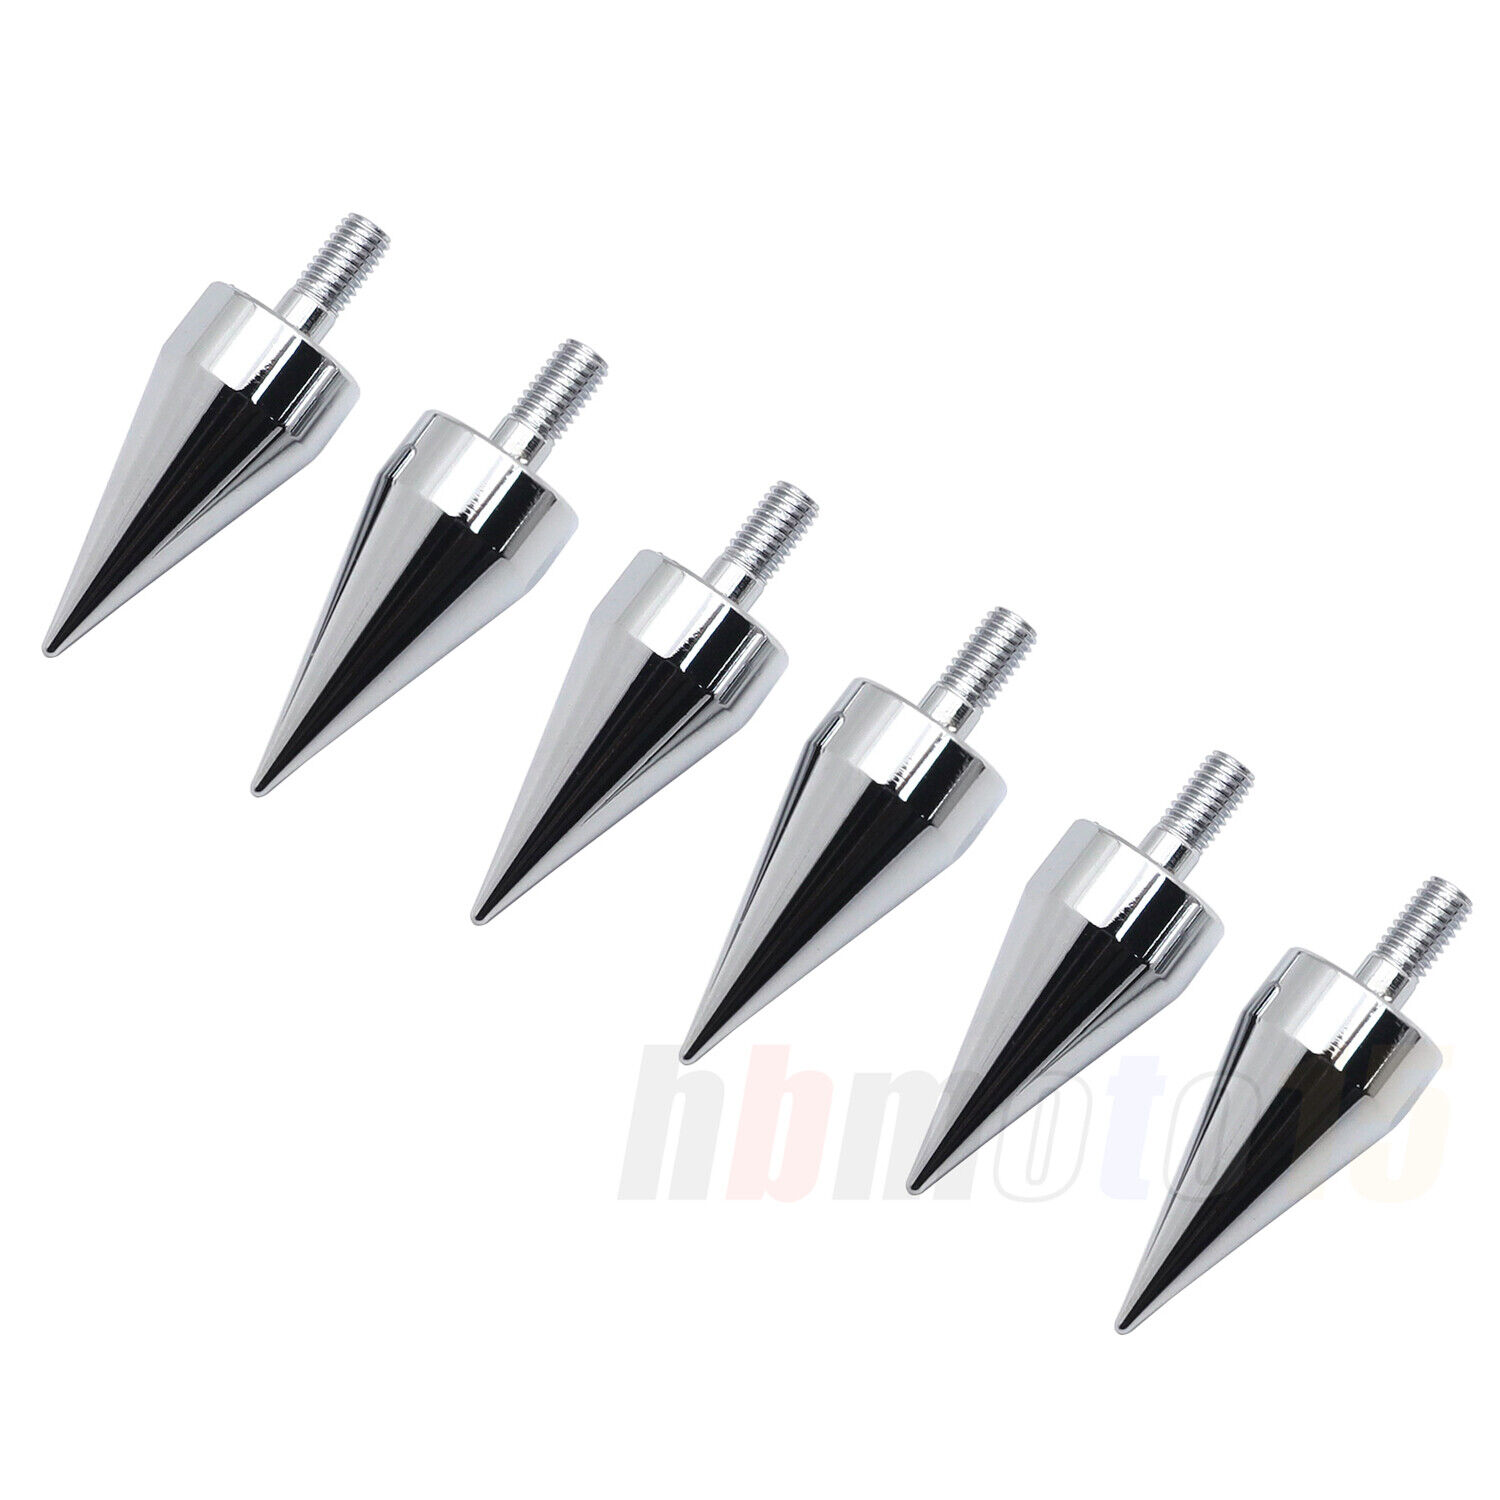 Chrome Spike Bolts （5mm）6PCs For Motorcycle Windscreen Fairings License Plate